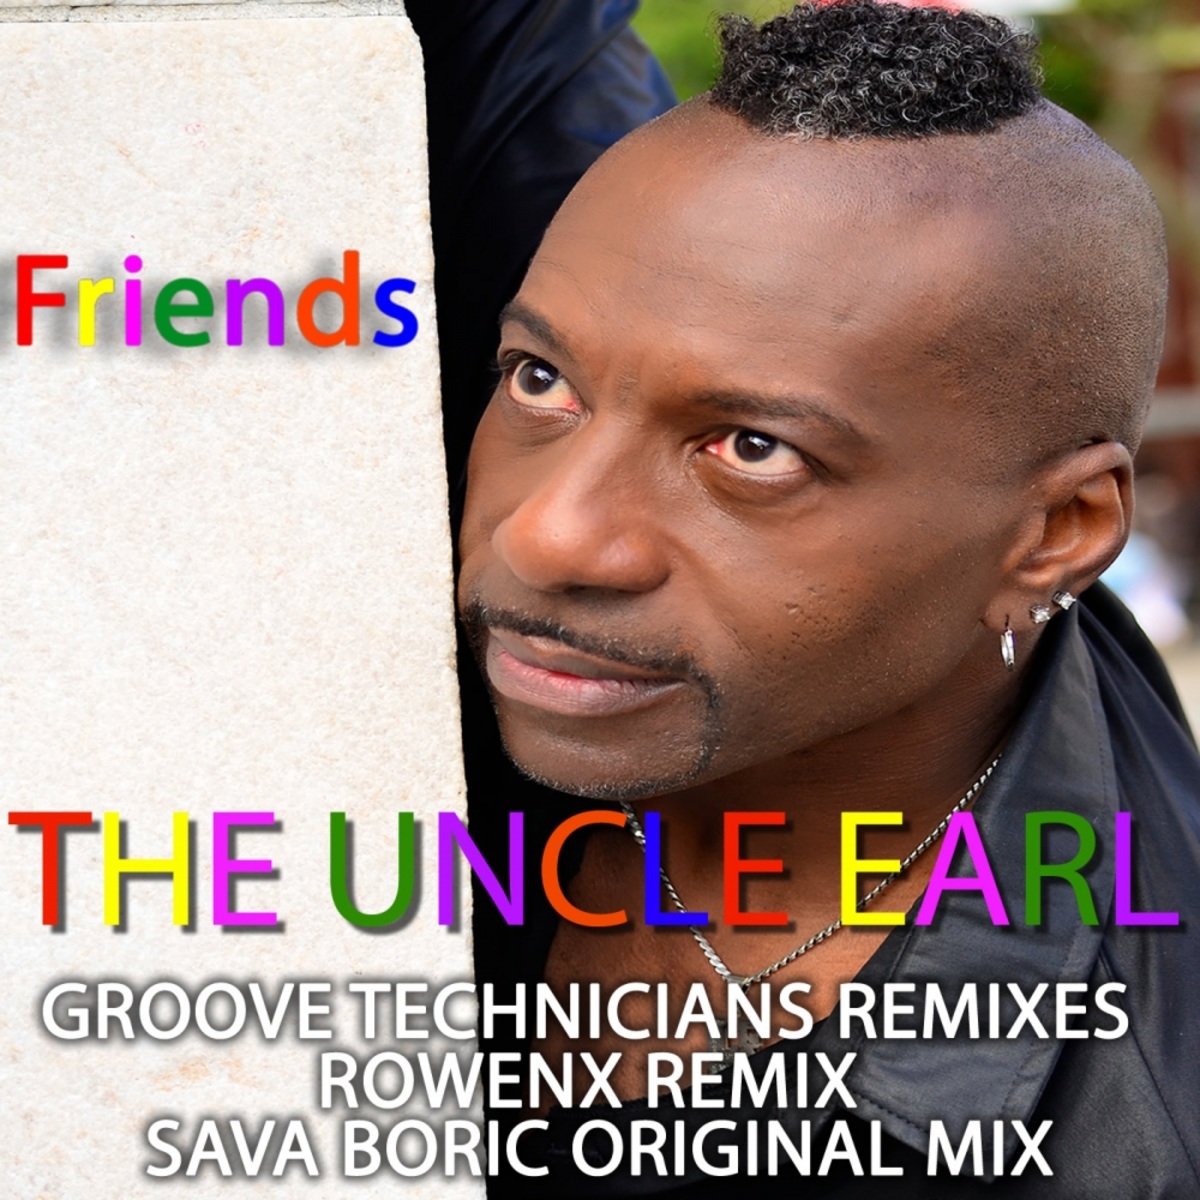 The Uncle Earl - Friends / Groove Technicians Records